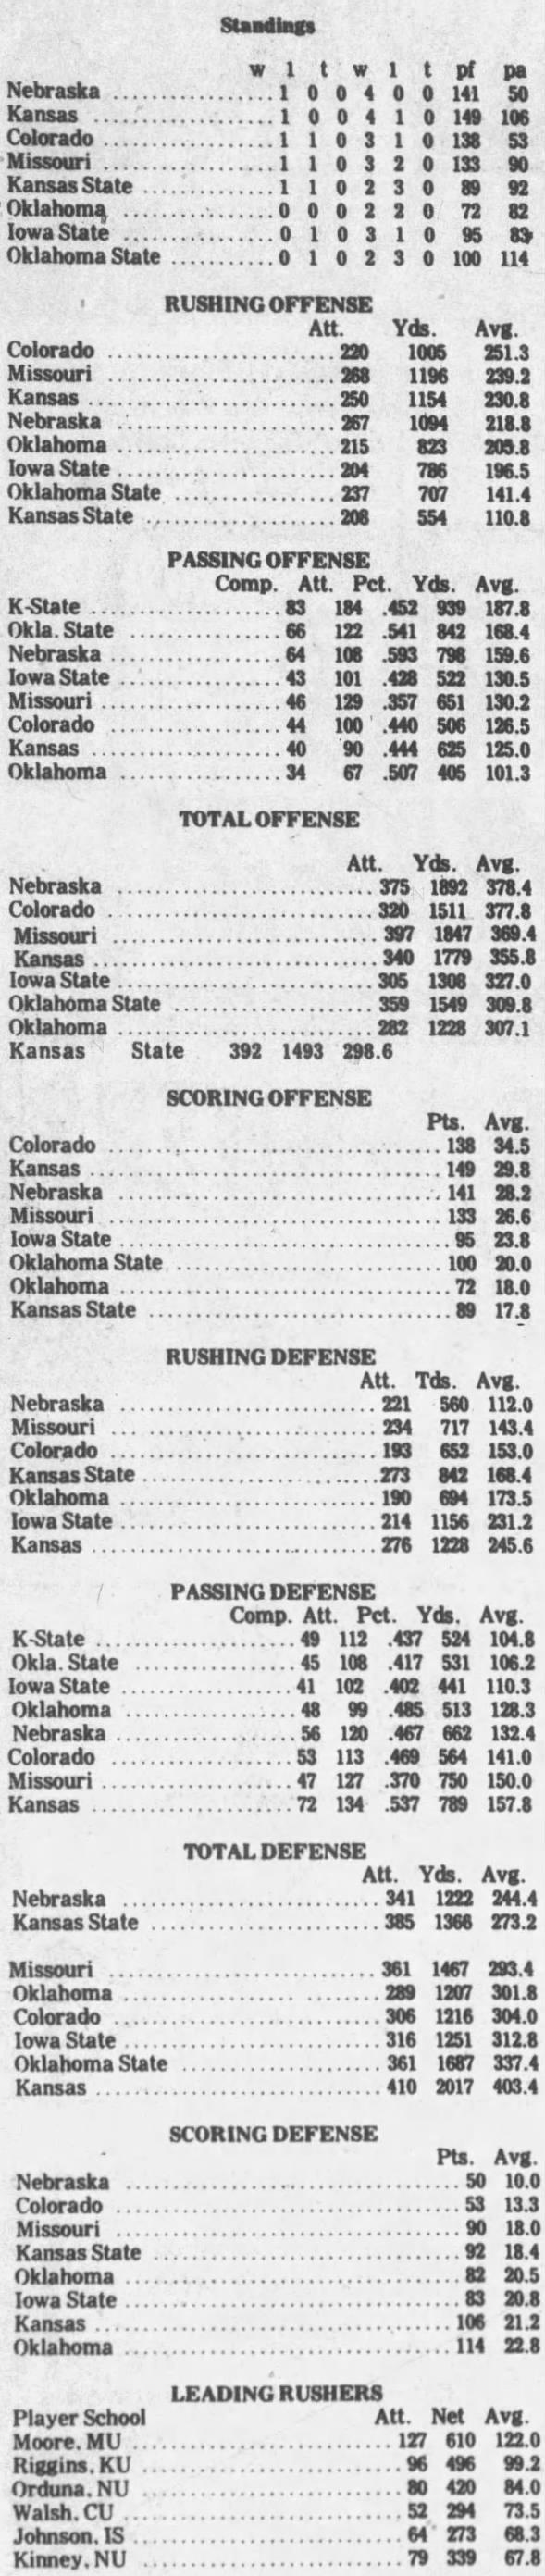 1970 Big Eight football five-game stats